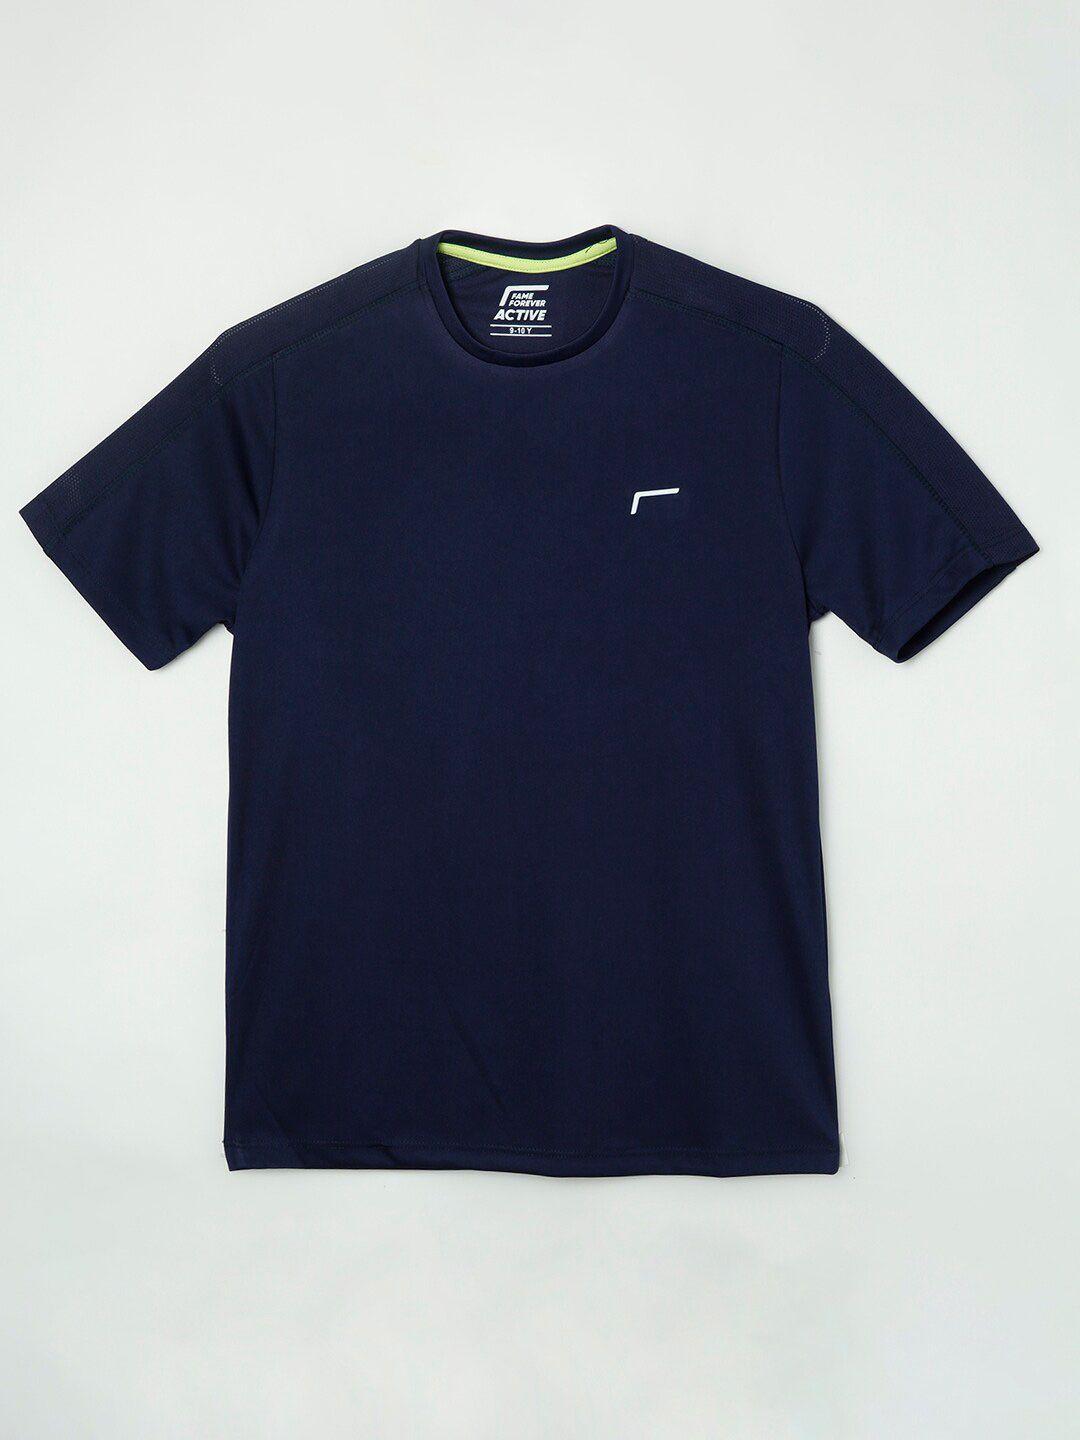 fame-forever-by-lifestyle-boys-navy-blue-t-shirt